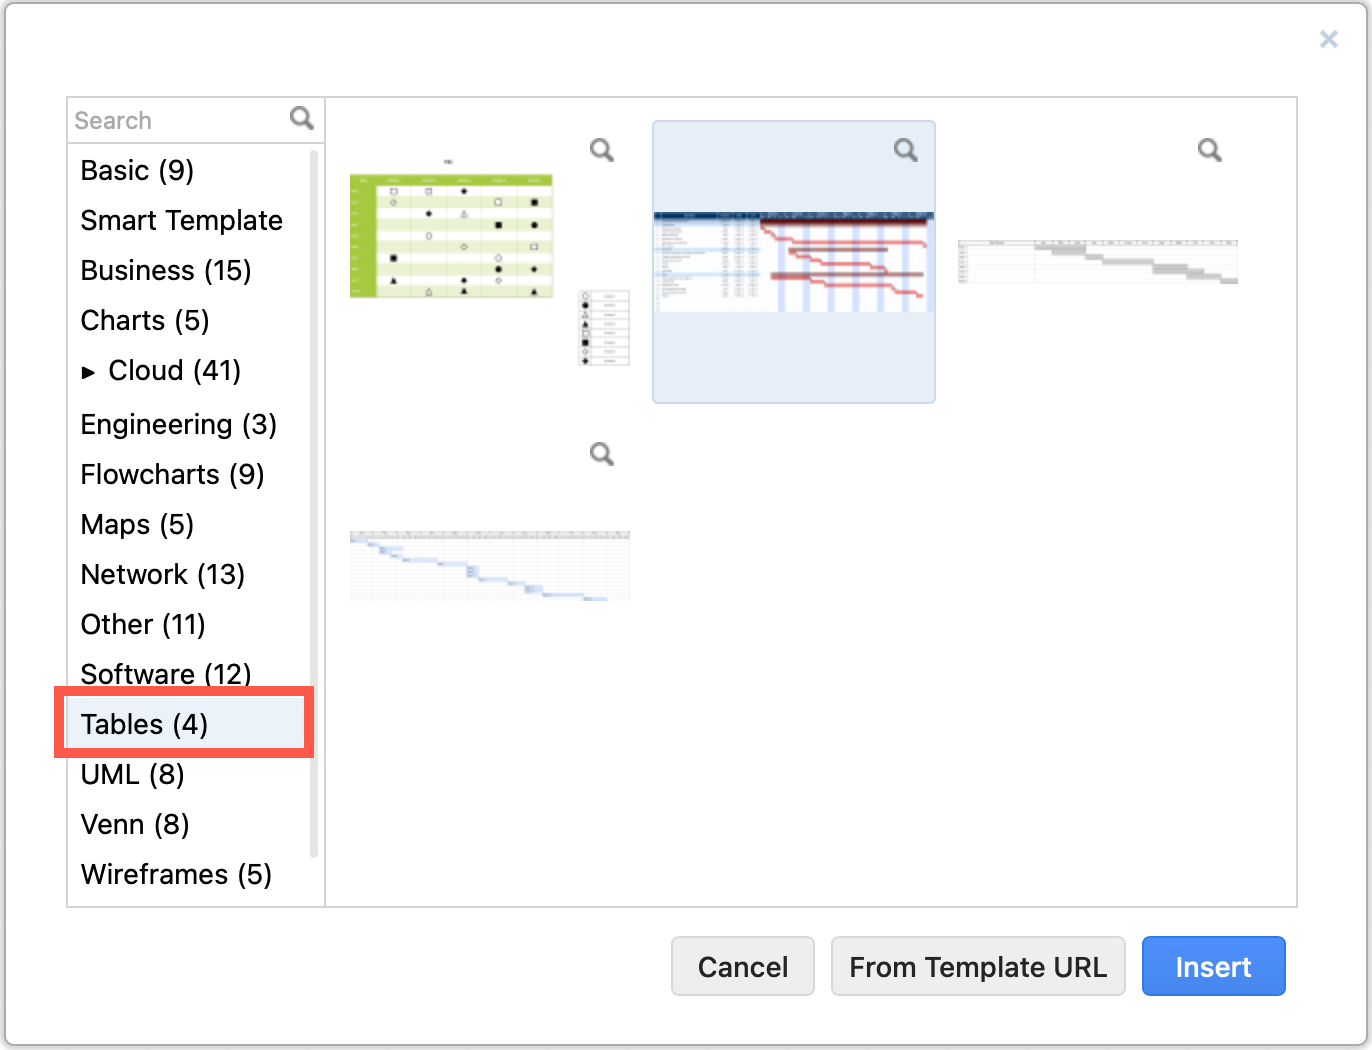 Generate a Gantt chart from a text description via the template library in draw.io